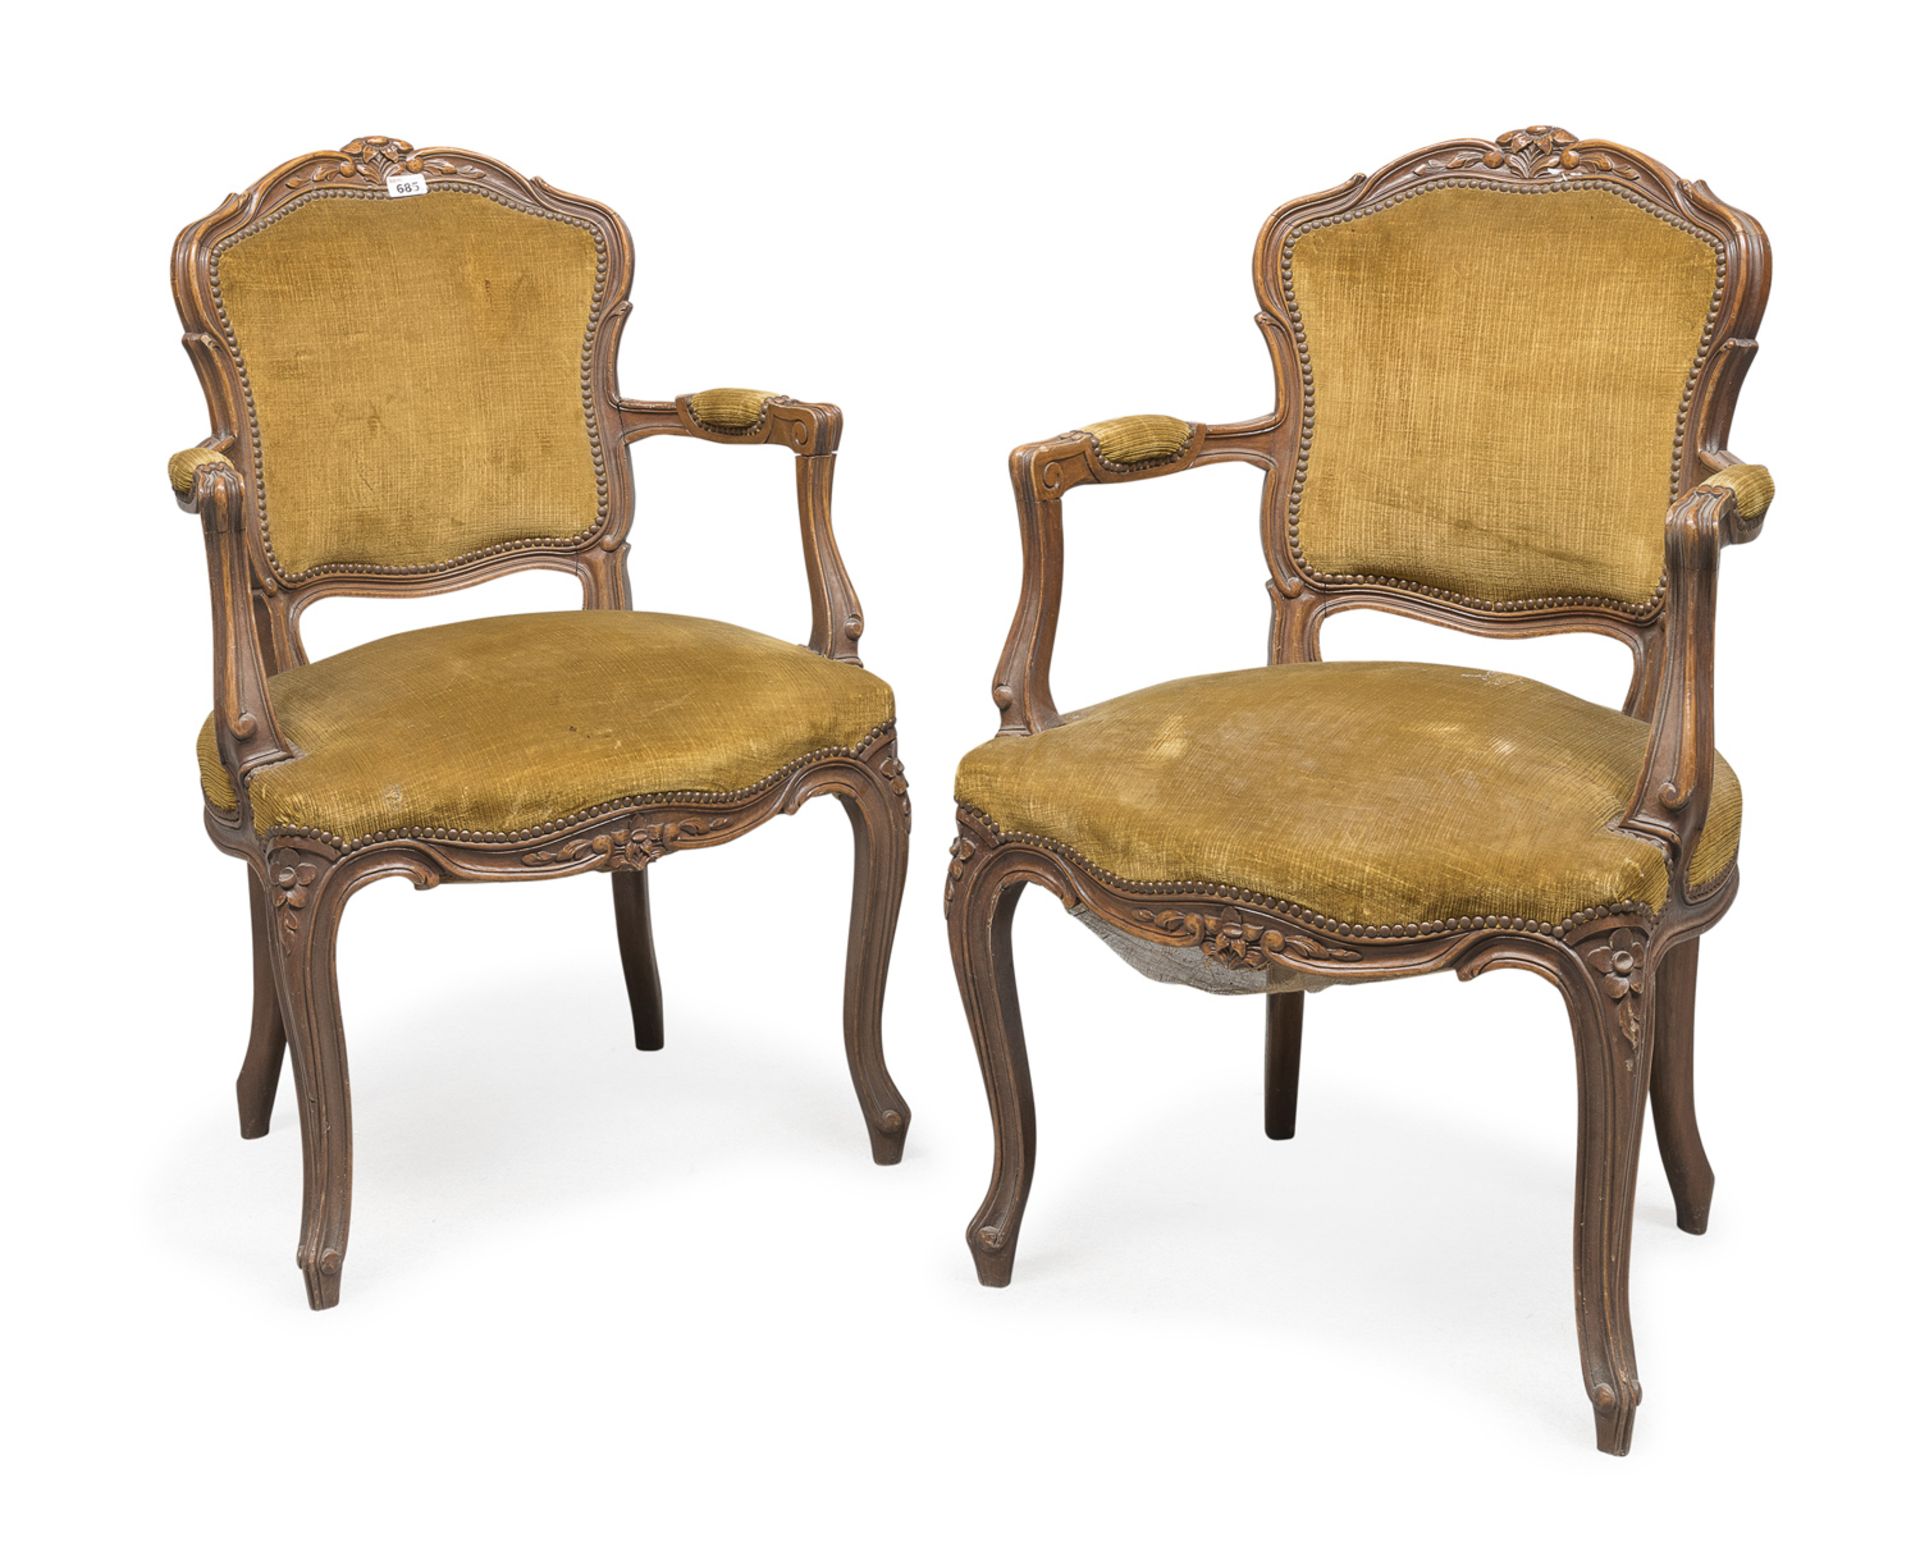 PAIR OF WOODEN ARMCHAIRS 20TH CENTURY